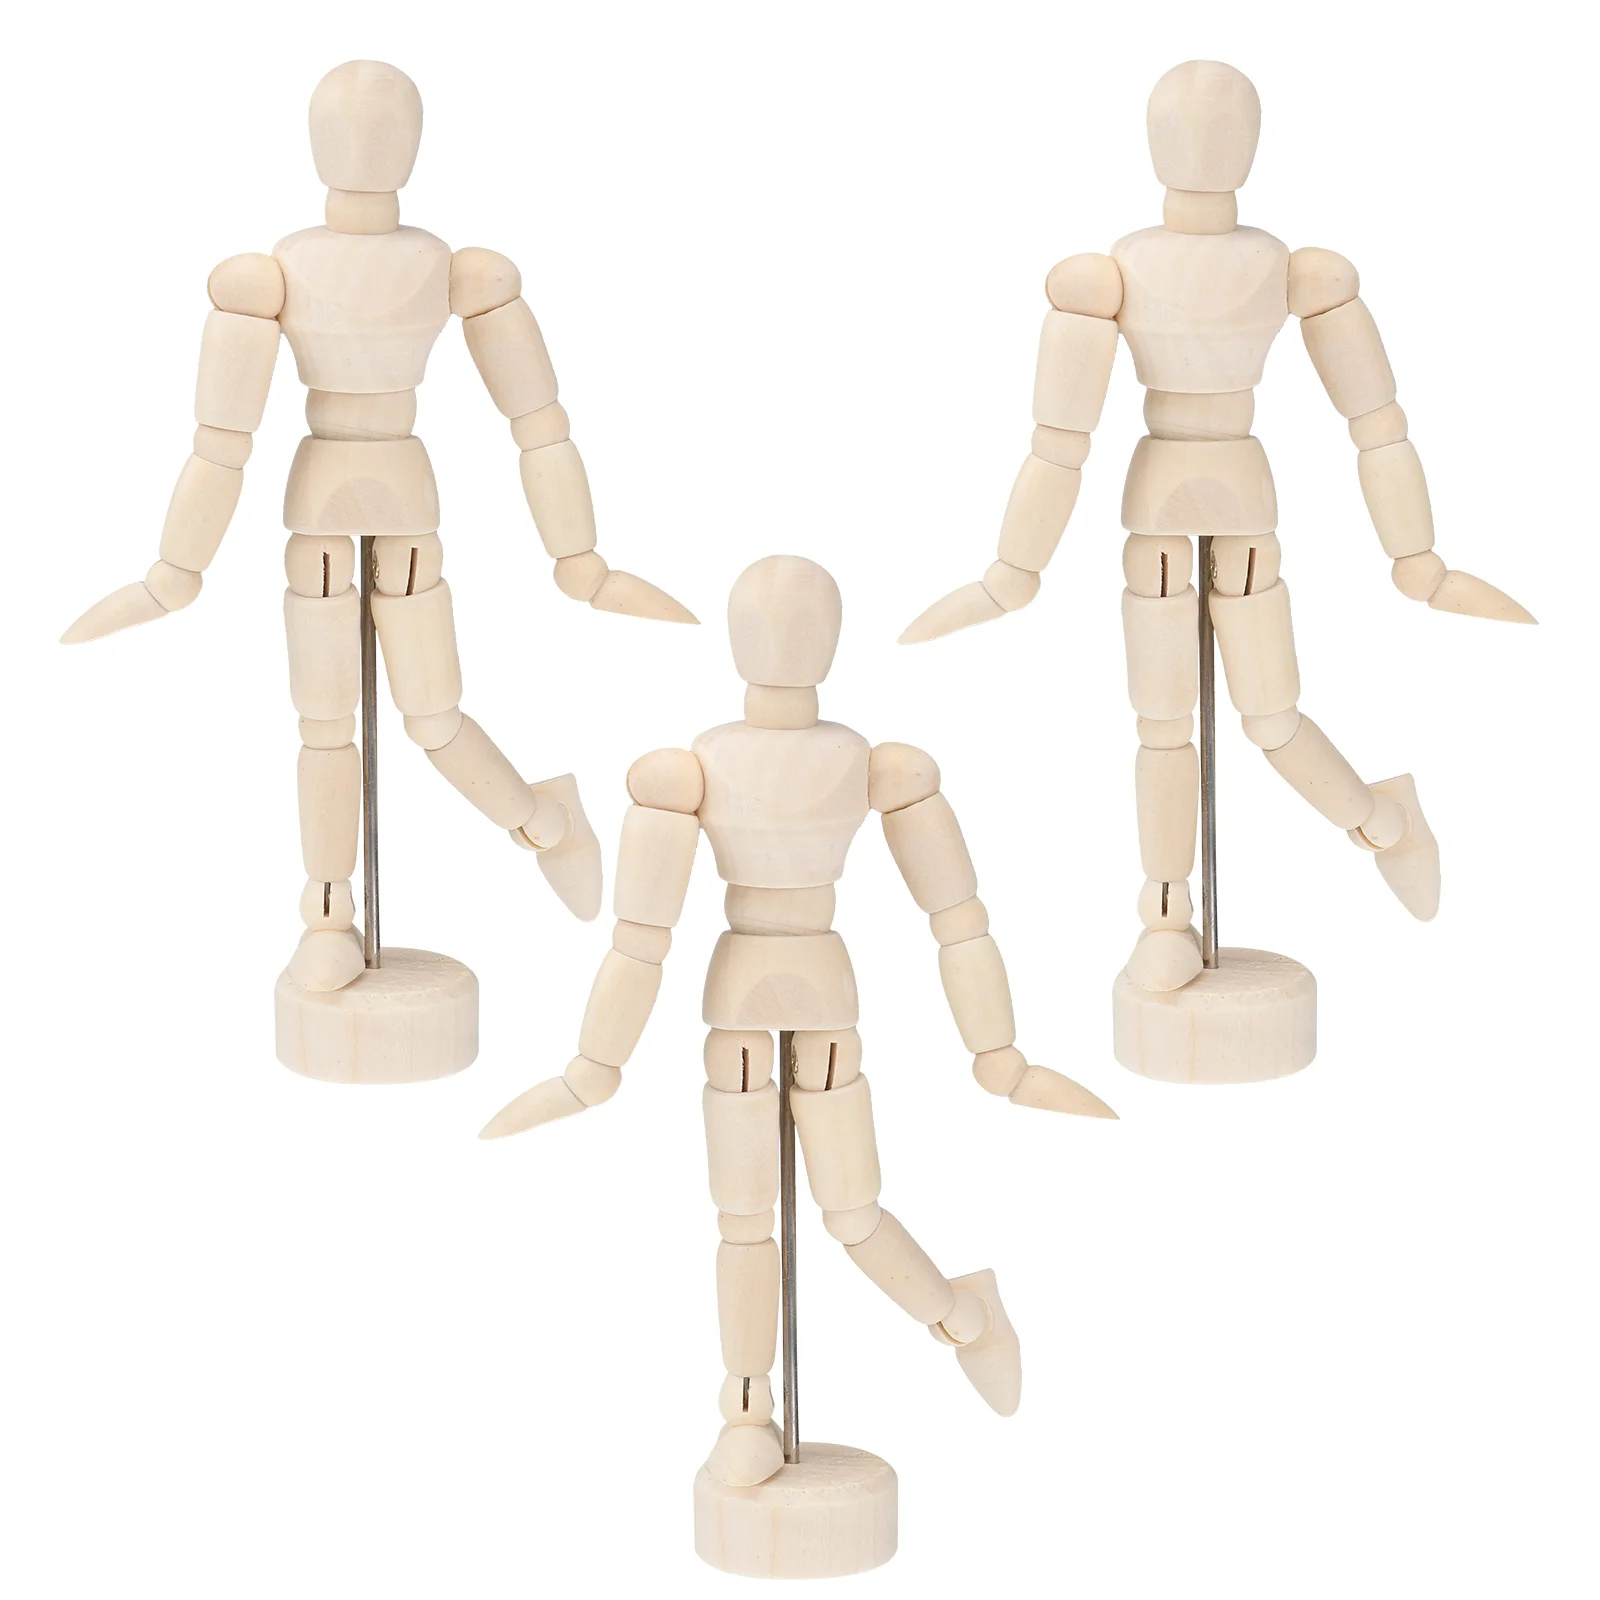 

Model Wooden Mannequin Figure Manikin Drawing Human Artist Sketching Artists Wood Jointed Sketch Joint Hand Articulated Figures